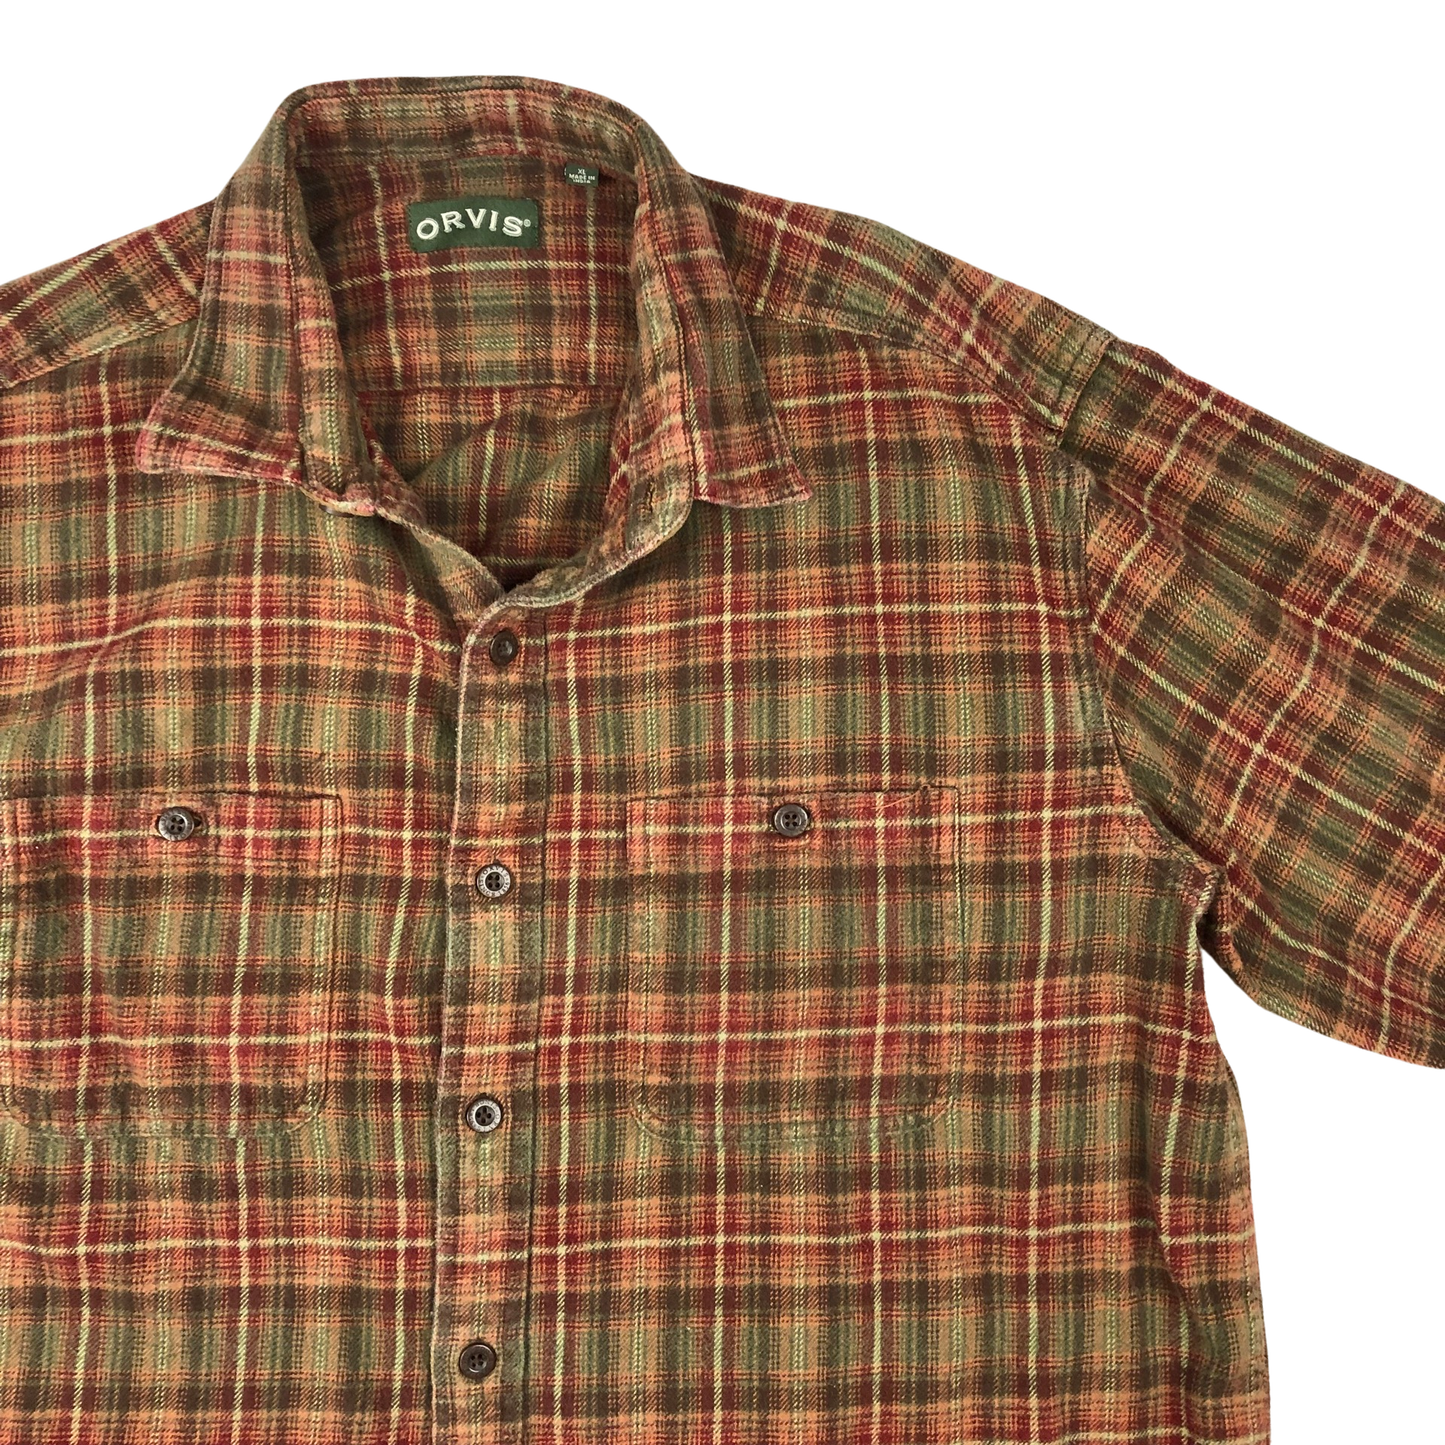 Preloved Orvis Red Plaid Flannel Shirt 3XL